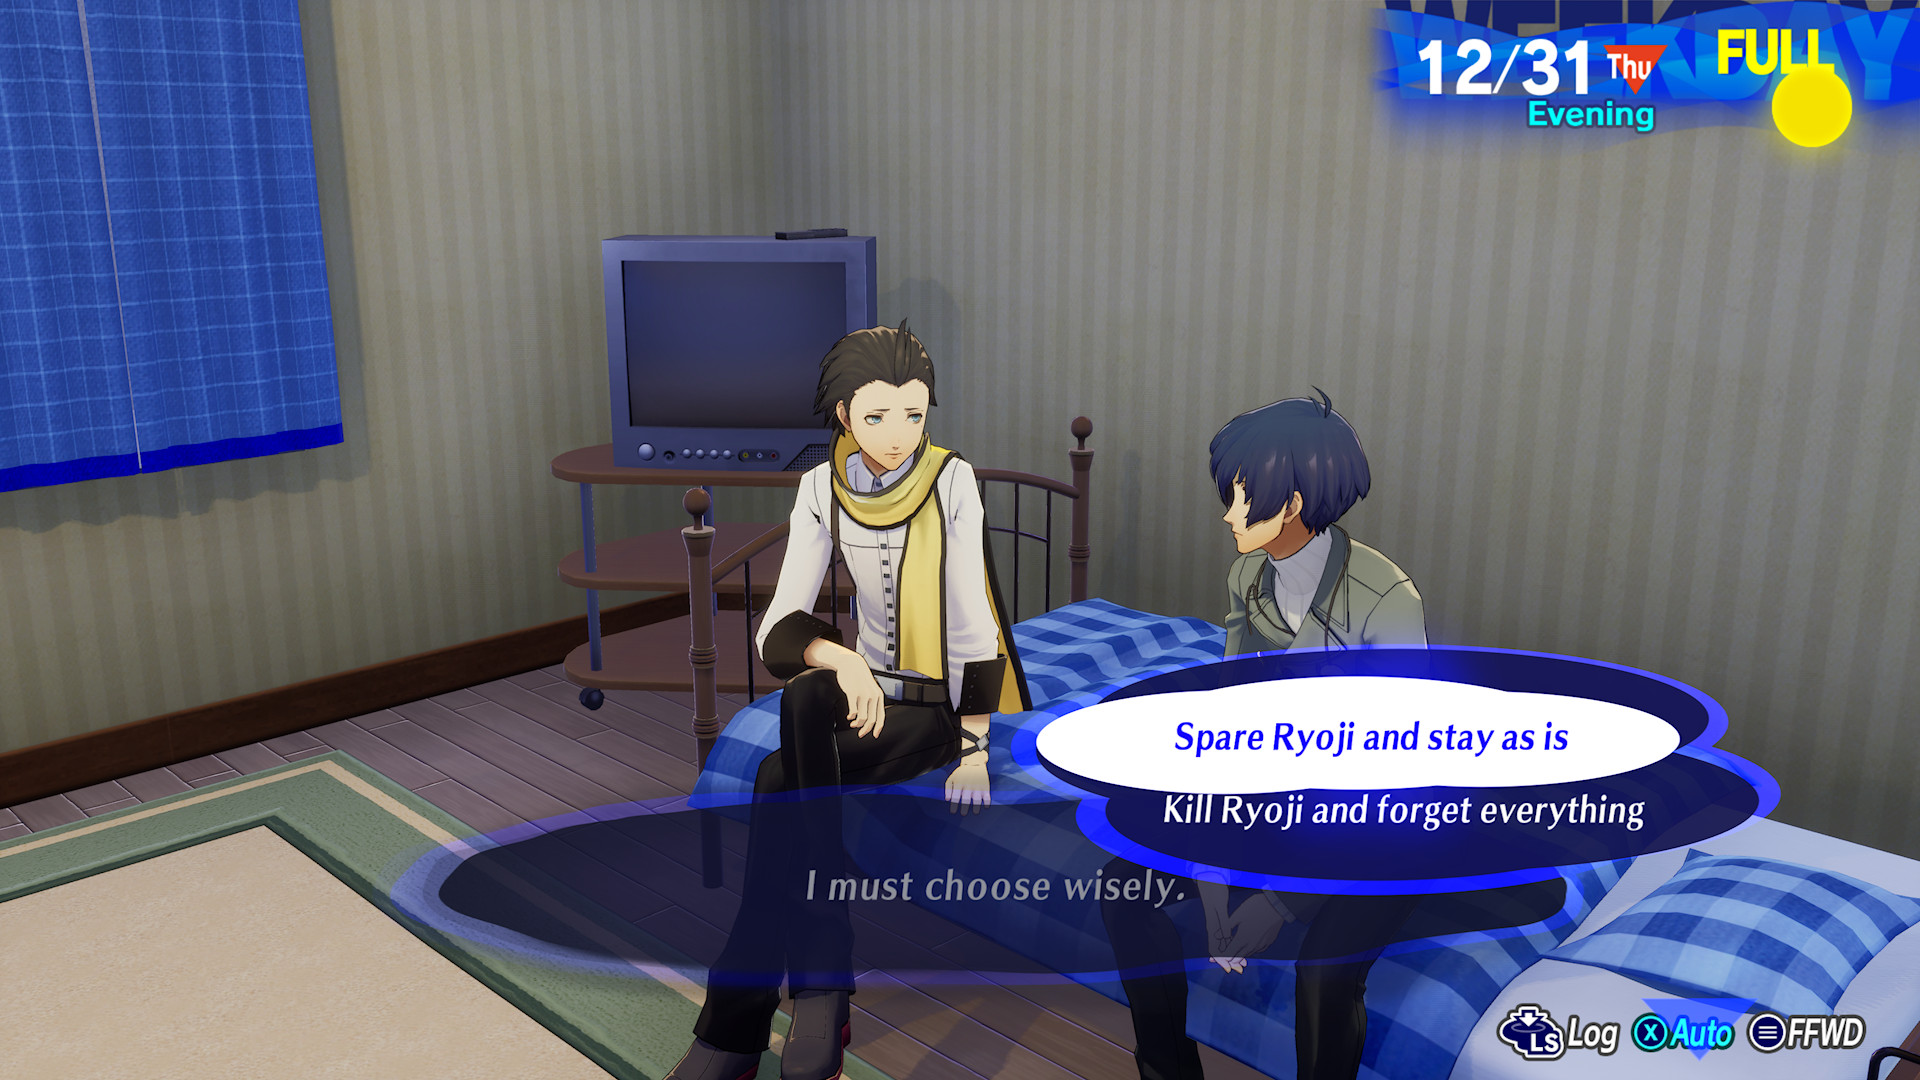 Ryoji asks the player to kill them in Persona 3 Reload